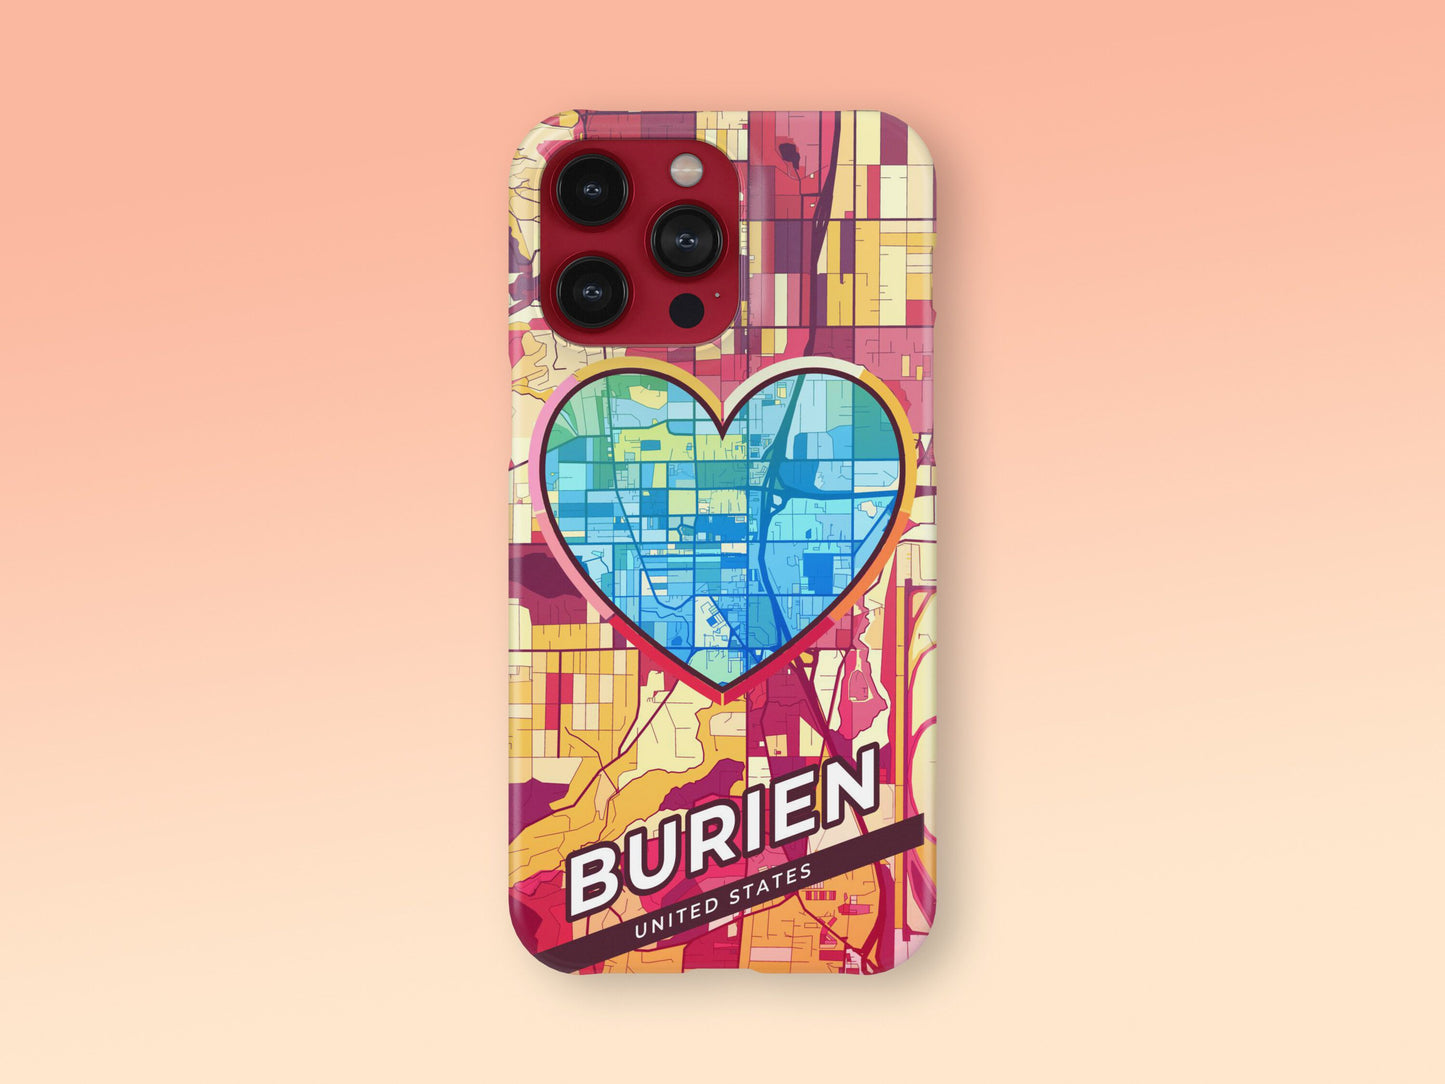 Burien Washington slim phone case with colorful icon. Birthday, wedding or housewarming gift. Couple match cases. 2